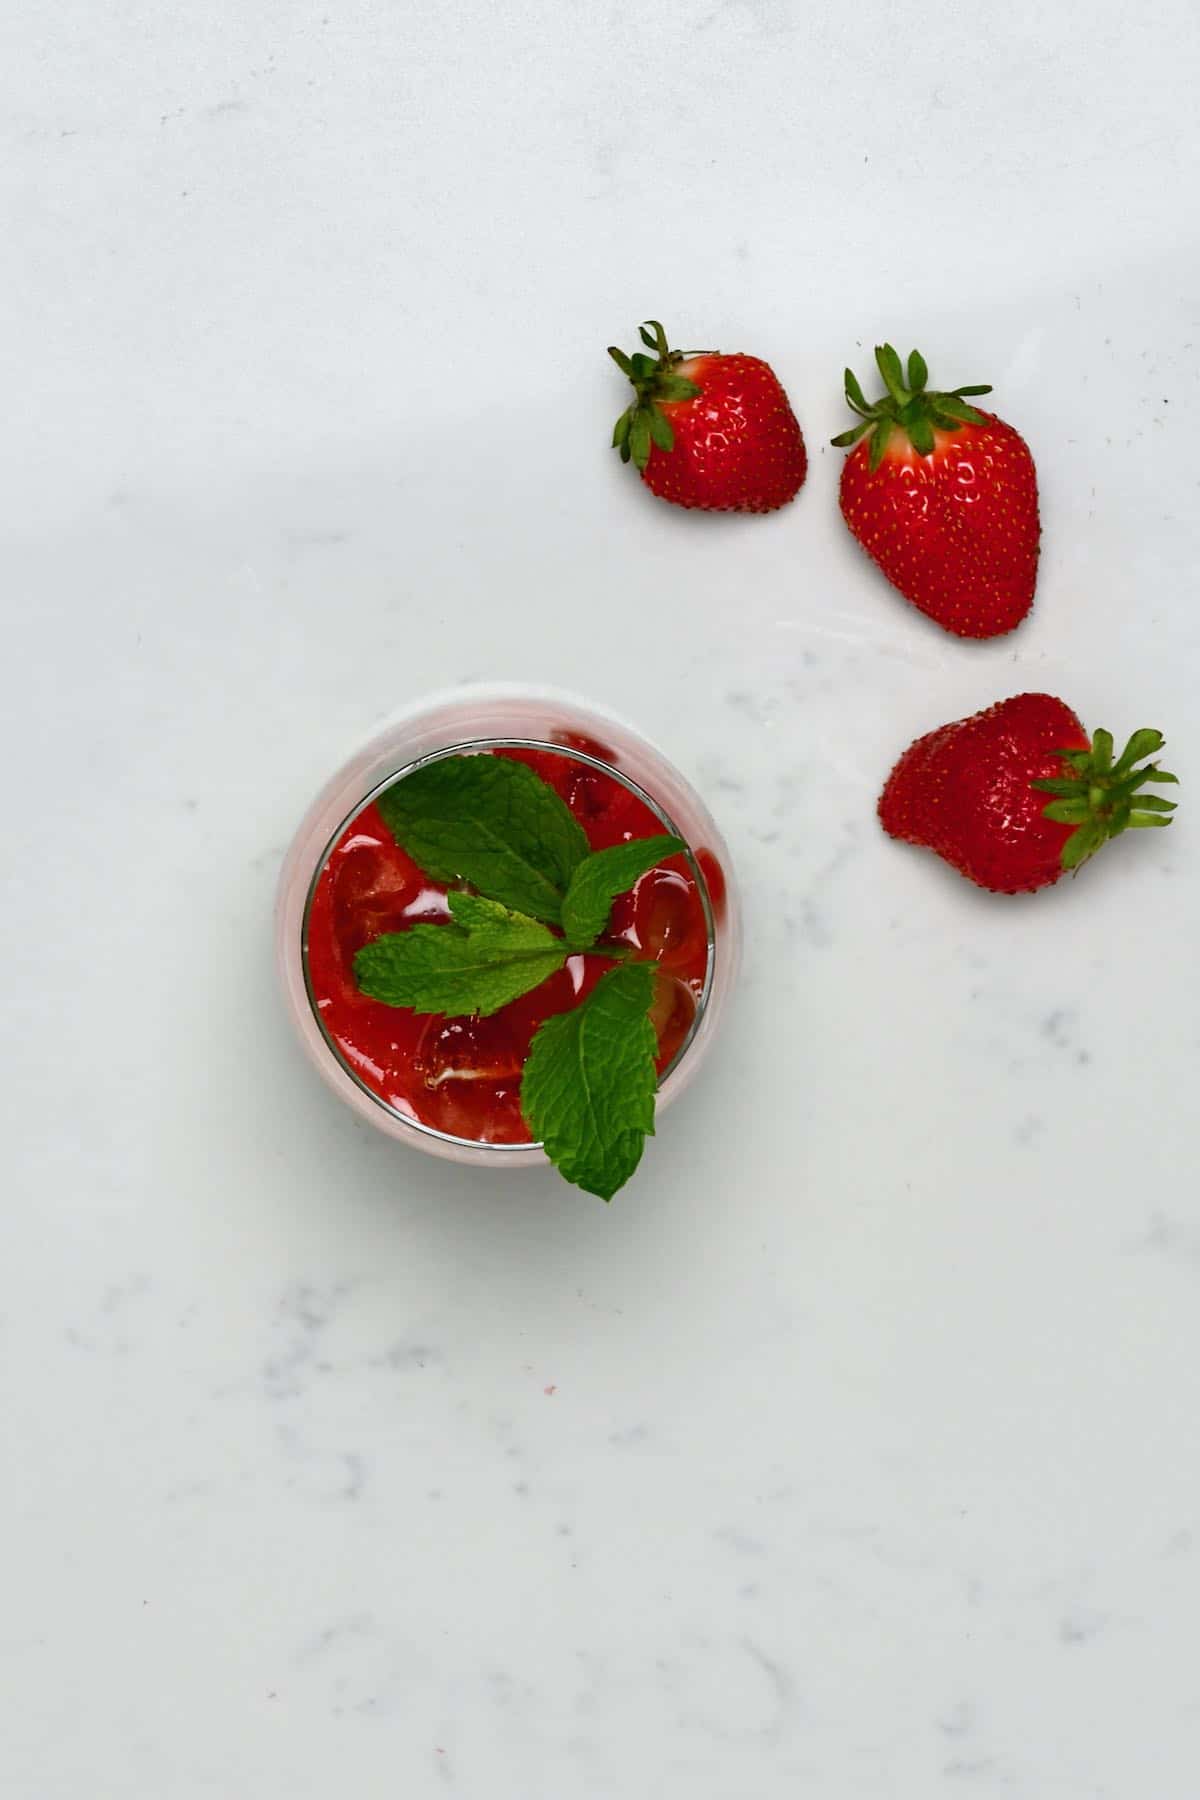 https://www.alphafoodie.com/wp-content/uploads/2021/08/Strawberry-Juice-A-glass-with-strawberry-juice.jpeg